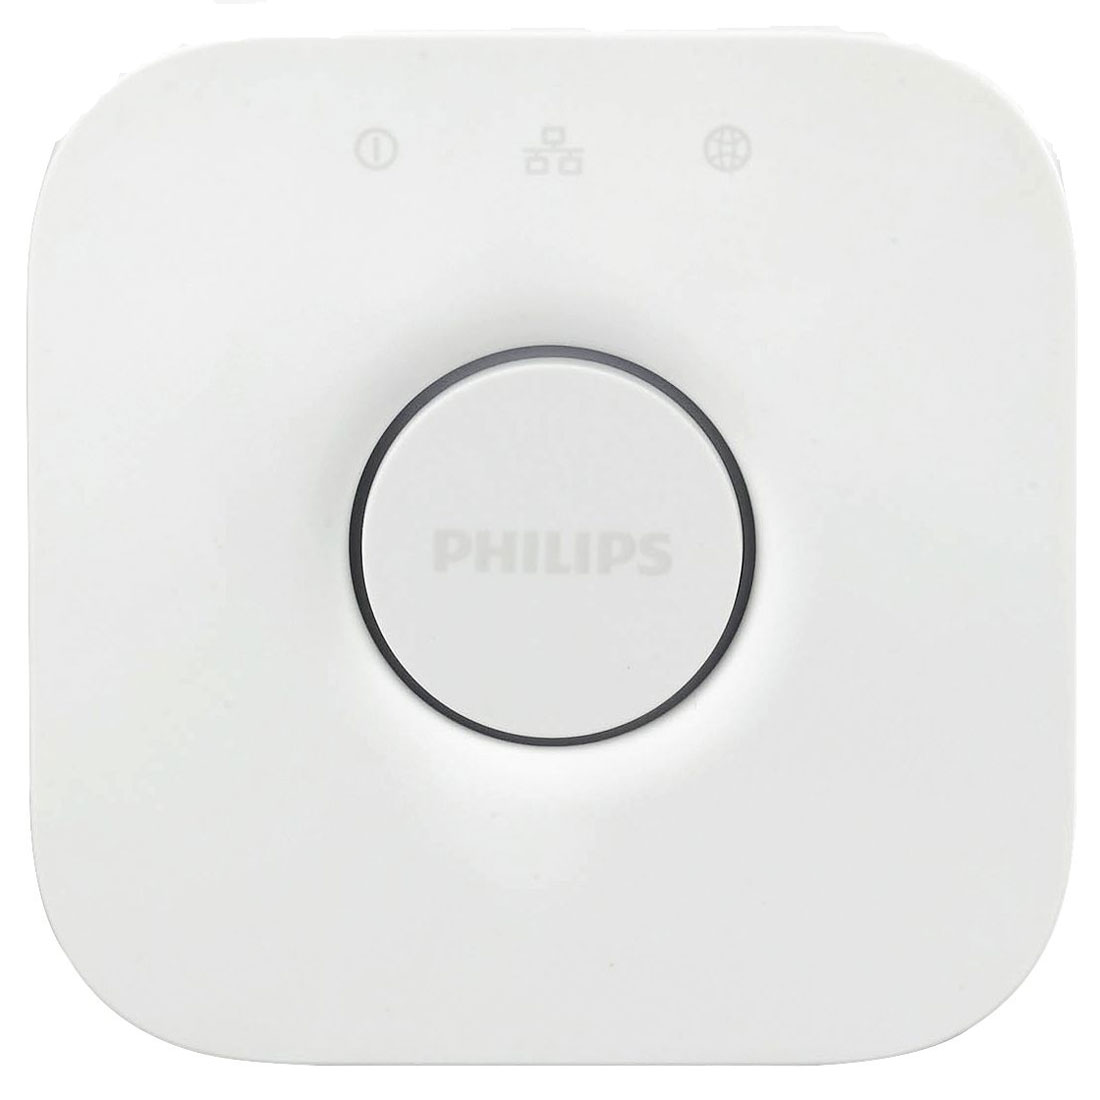 The Philips hue Bridge V2 is an Ethernet controlled - CSA-IOT